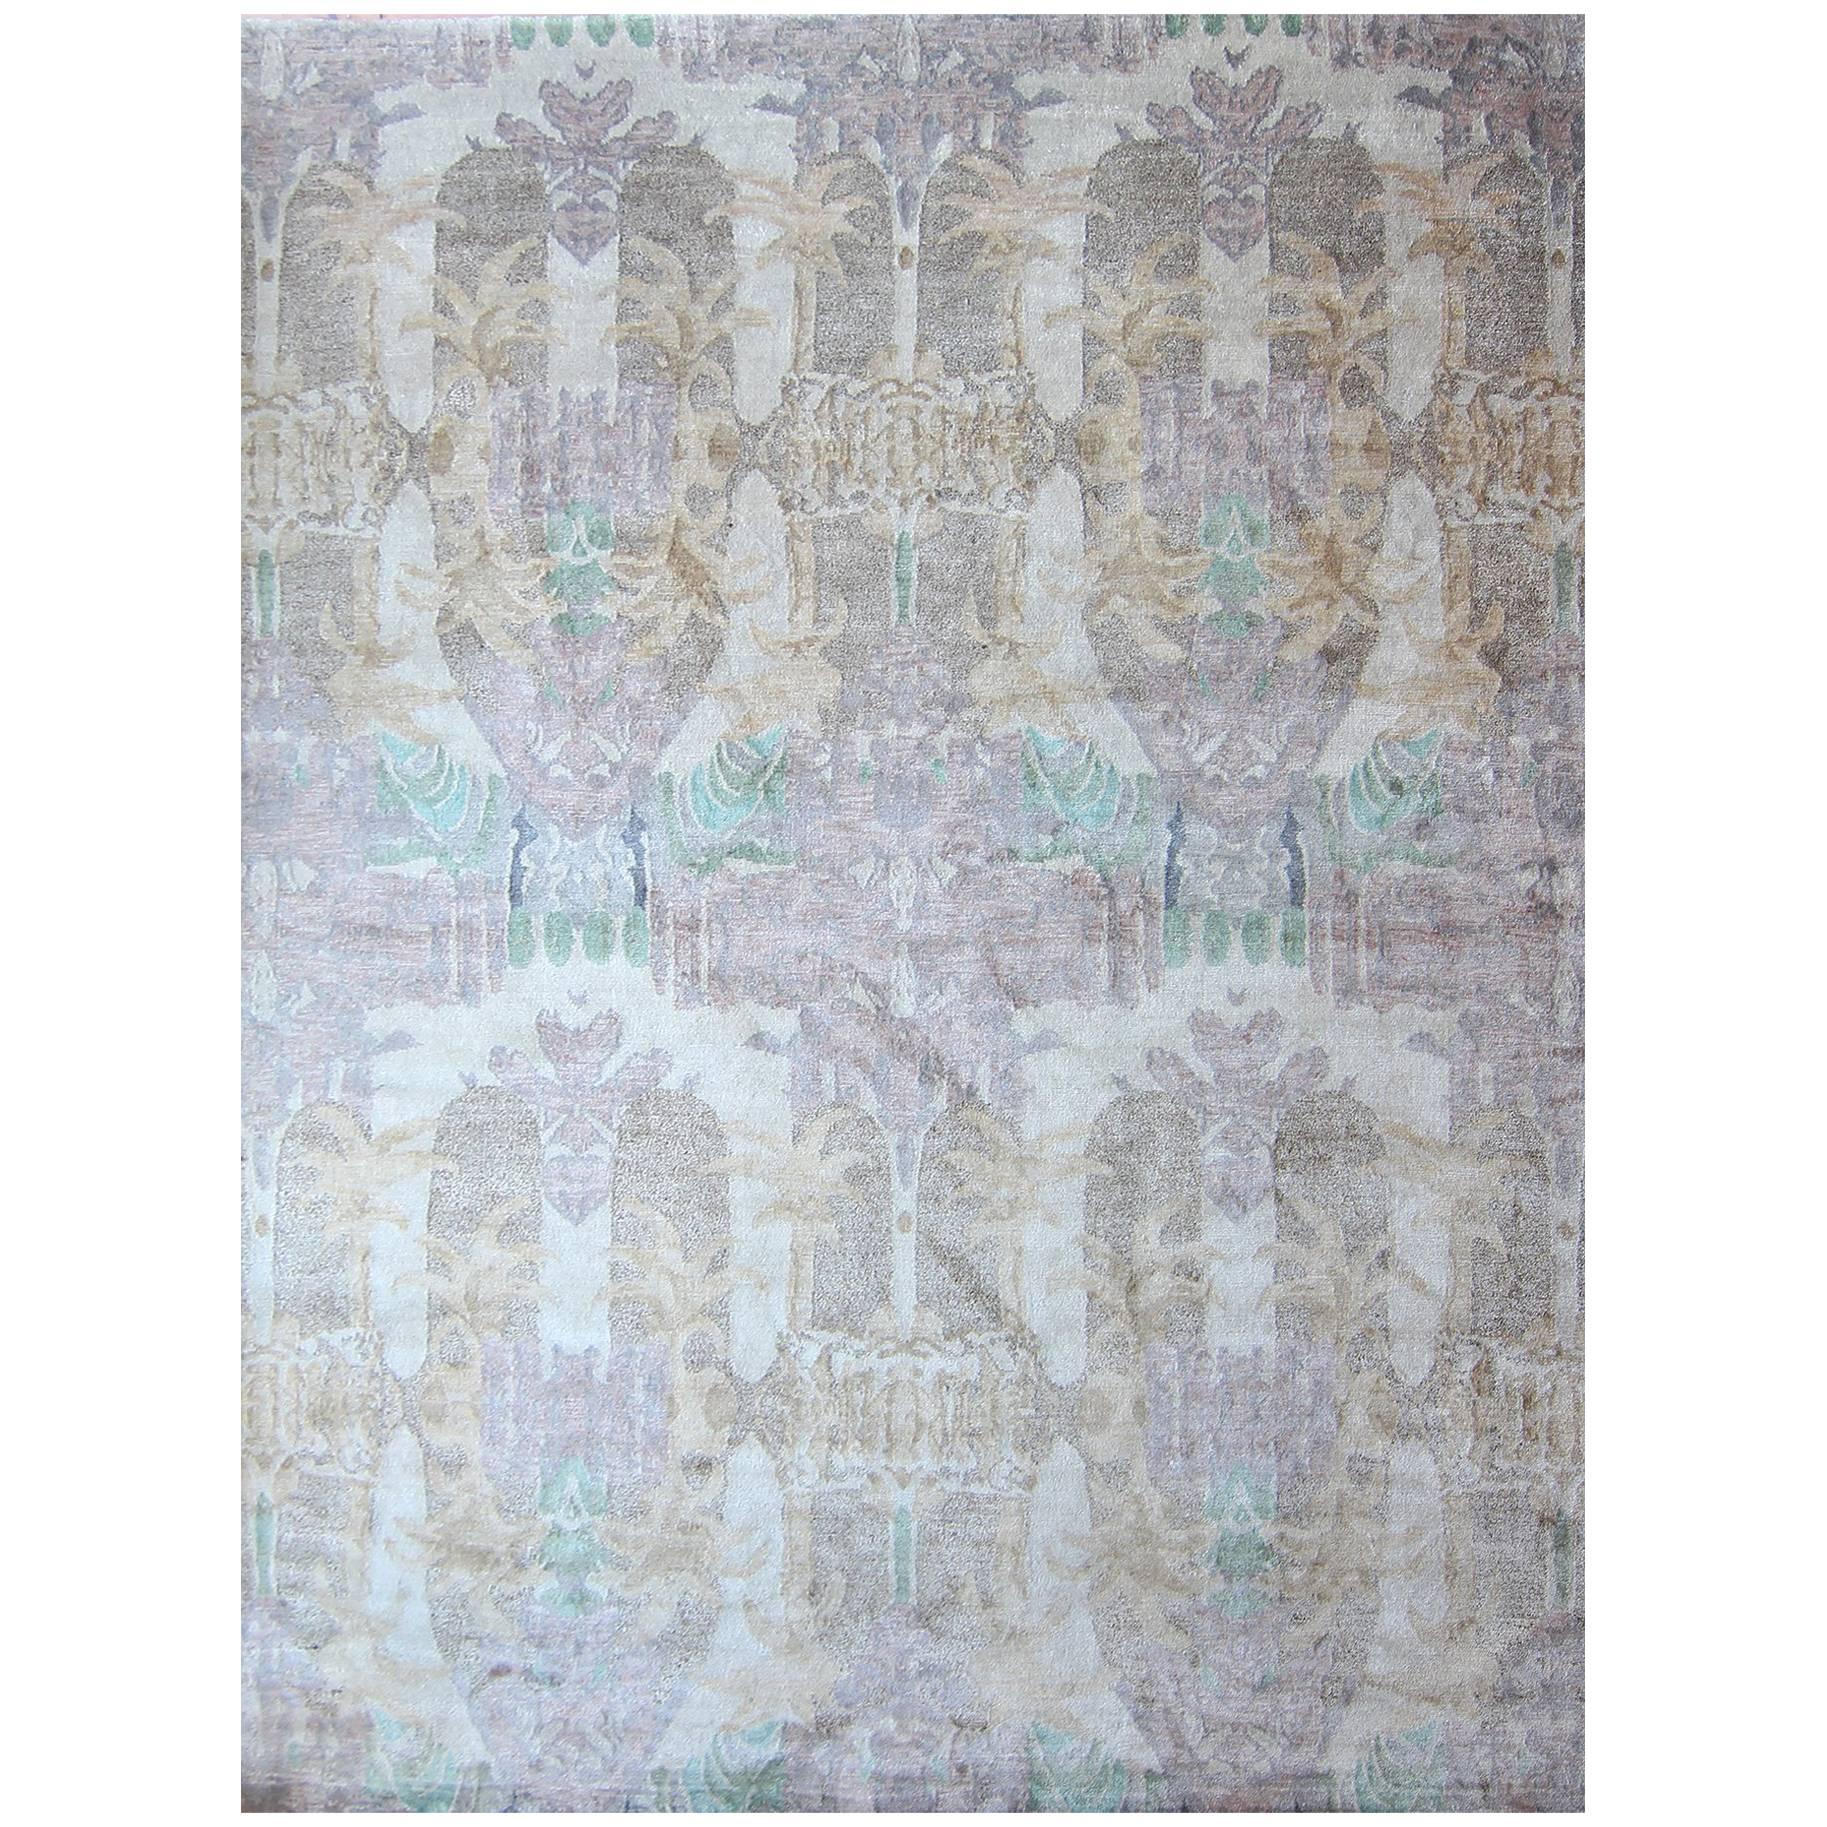 Eskayel, Clairmont Rug, Matka Silk and Wool Blend For Sale